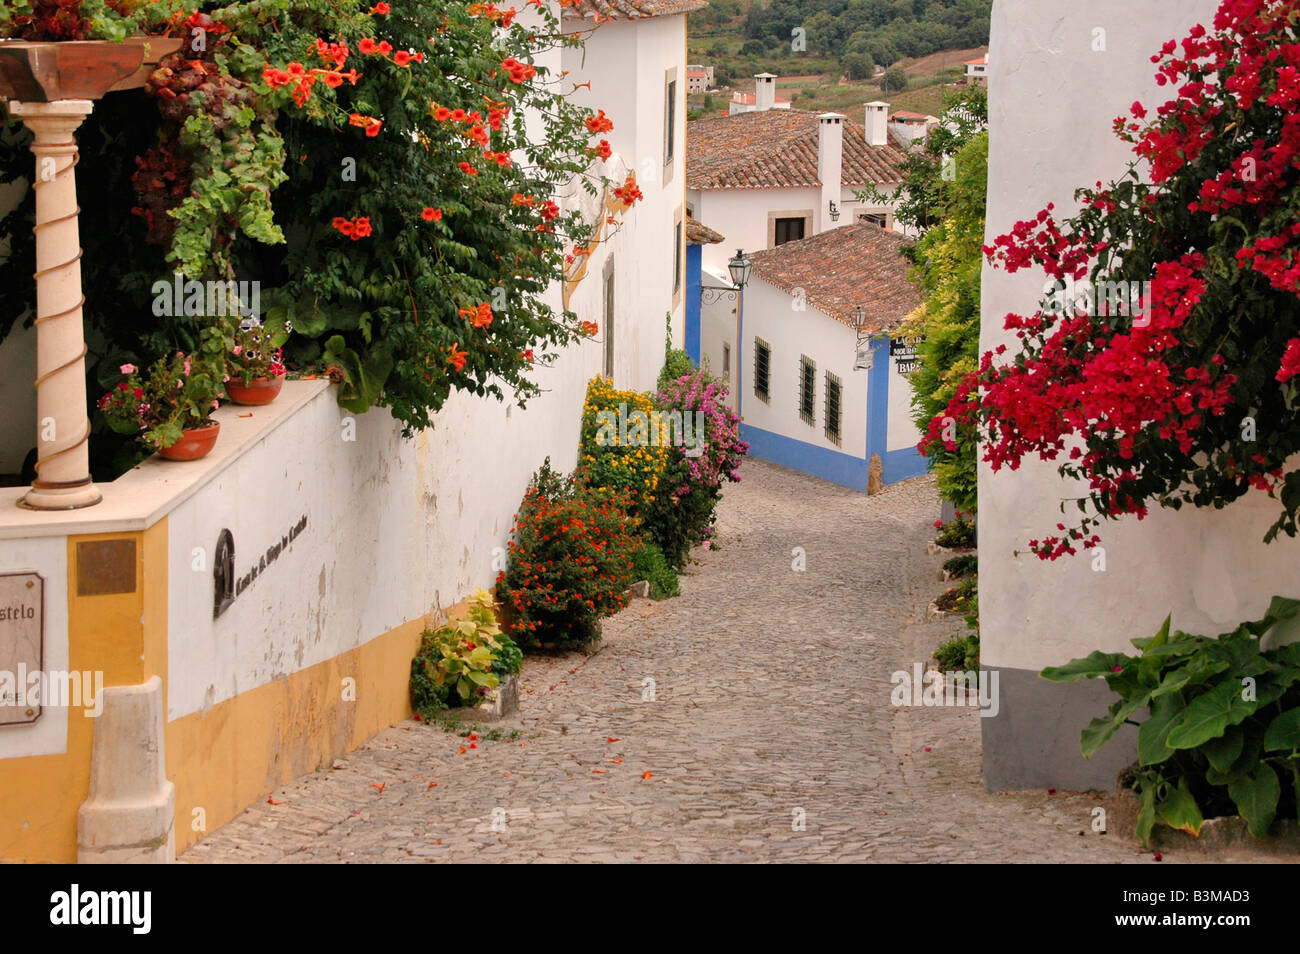 A street scene of flowers and houses within the  preserved mediaevel town of Obidos, Portugal. Stock Photo